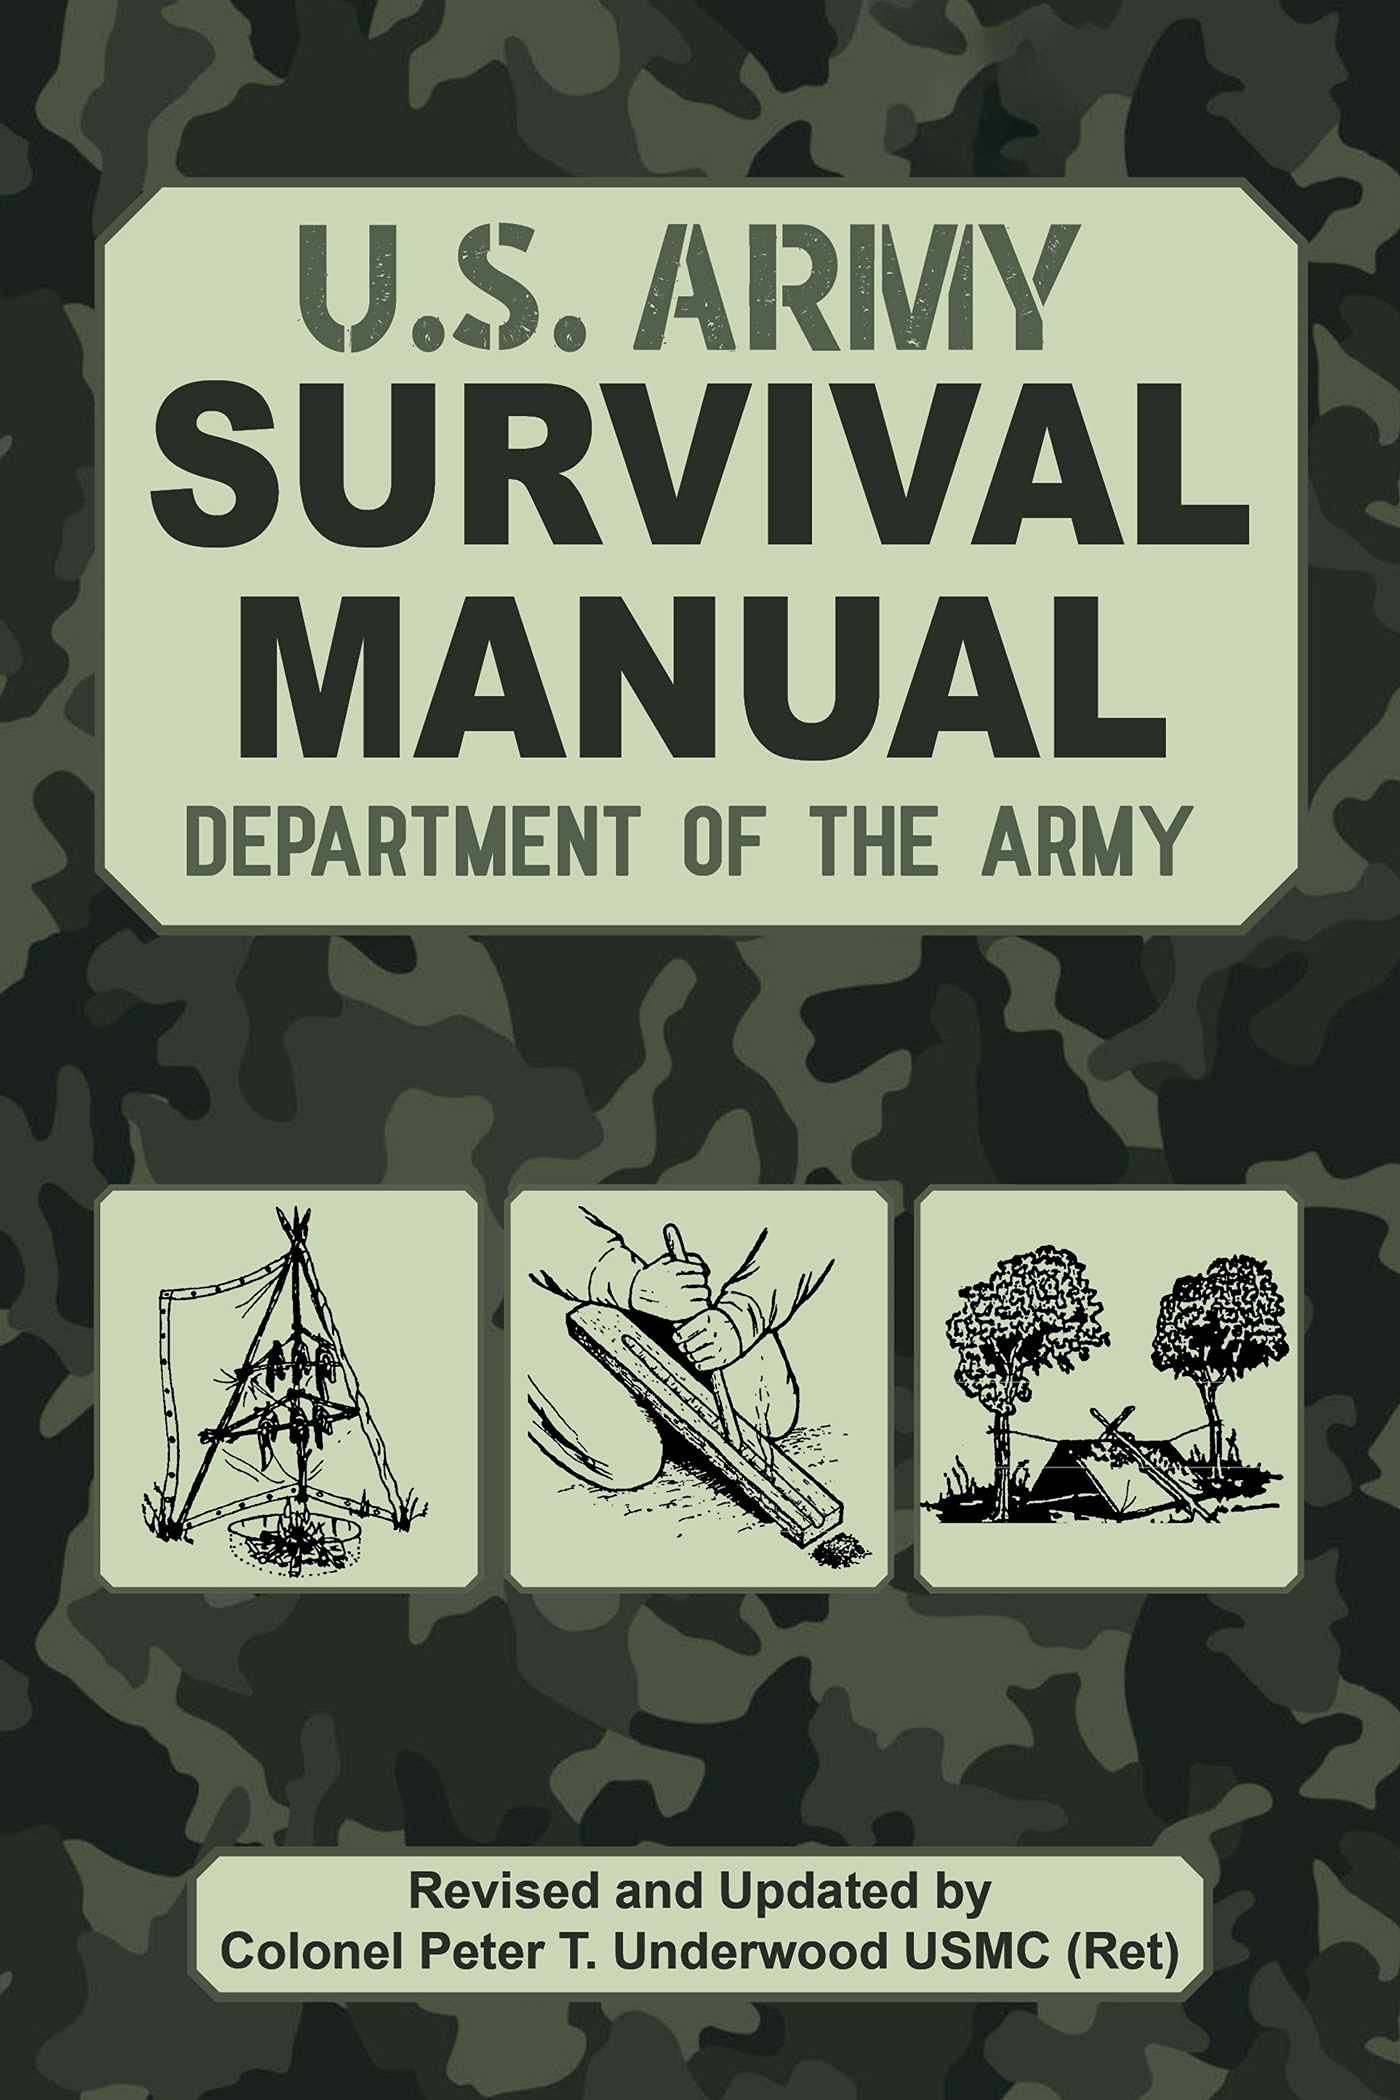 The Official U.S. Army Survival Manual